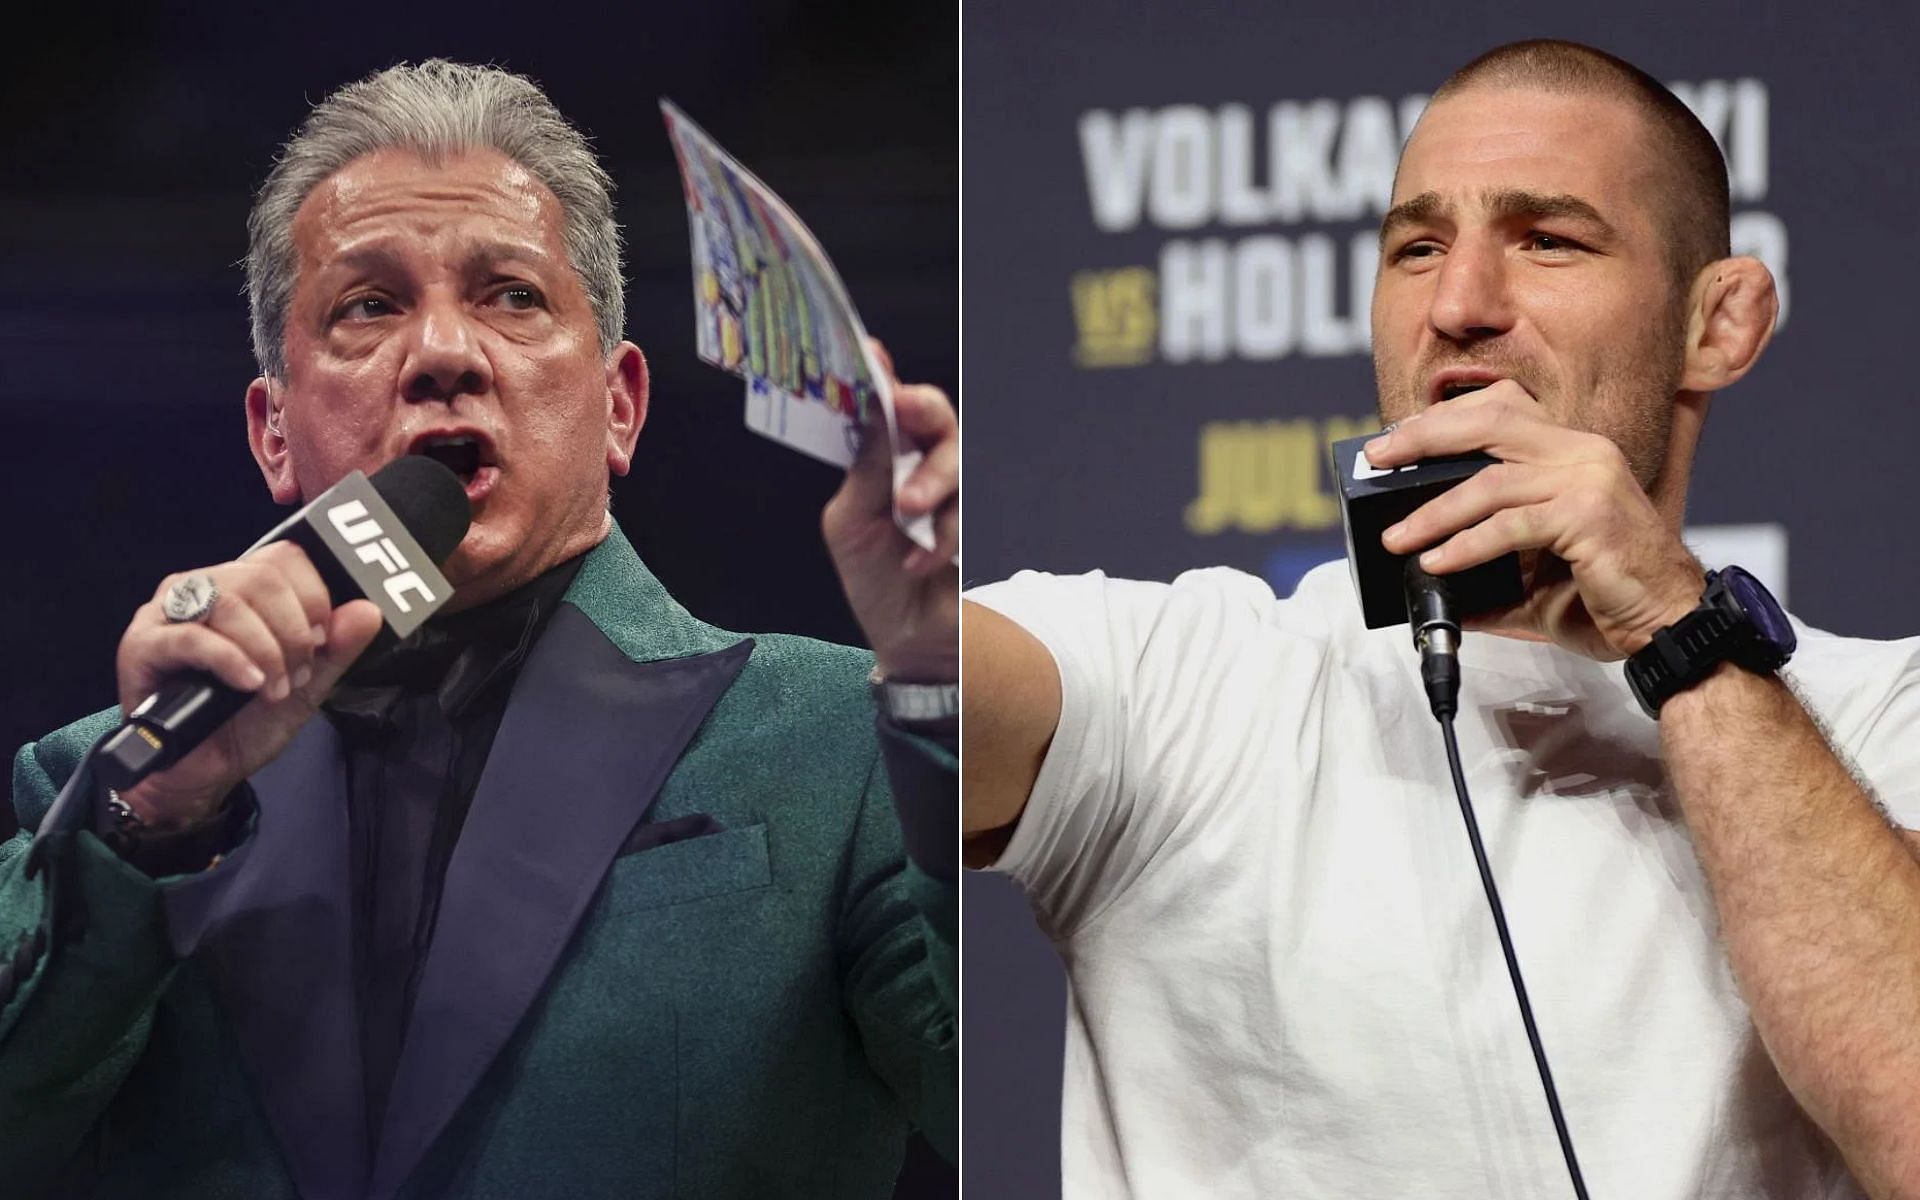 Bruce Buffer [Left], and Sean Strickland [Right]